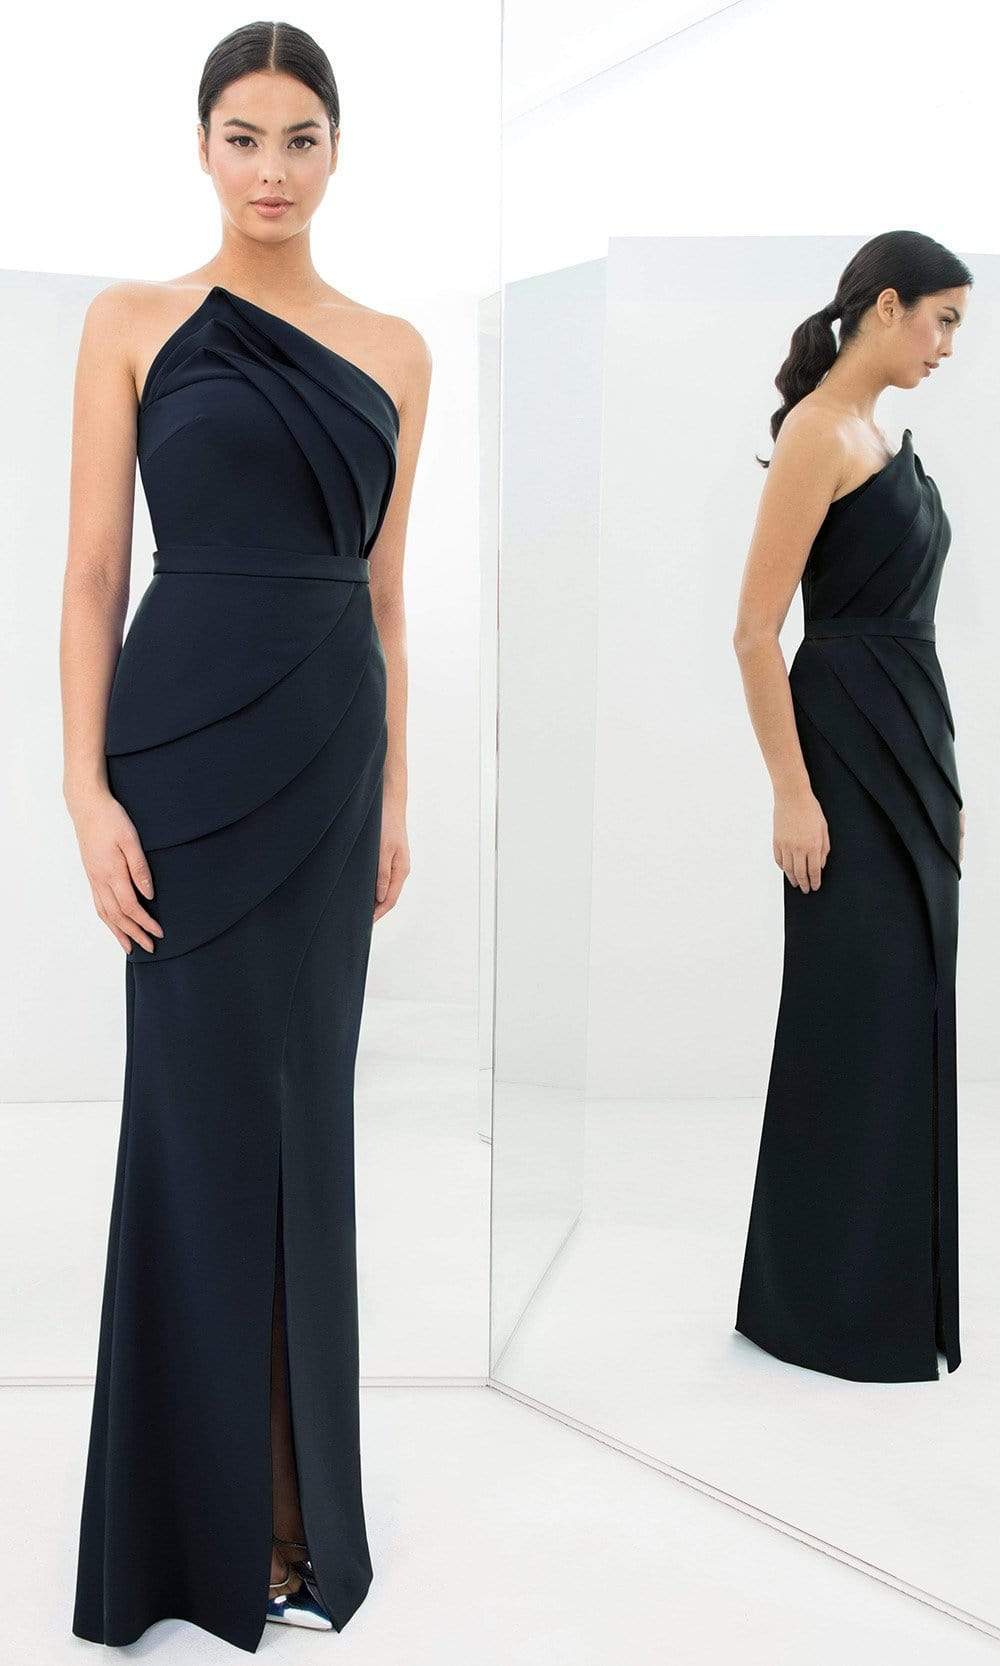 Alexander By Daymor - 1381 Strapless Pleated Sheath Dress With Slit Evening Dresses 00 / Navy